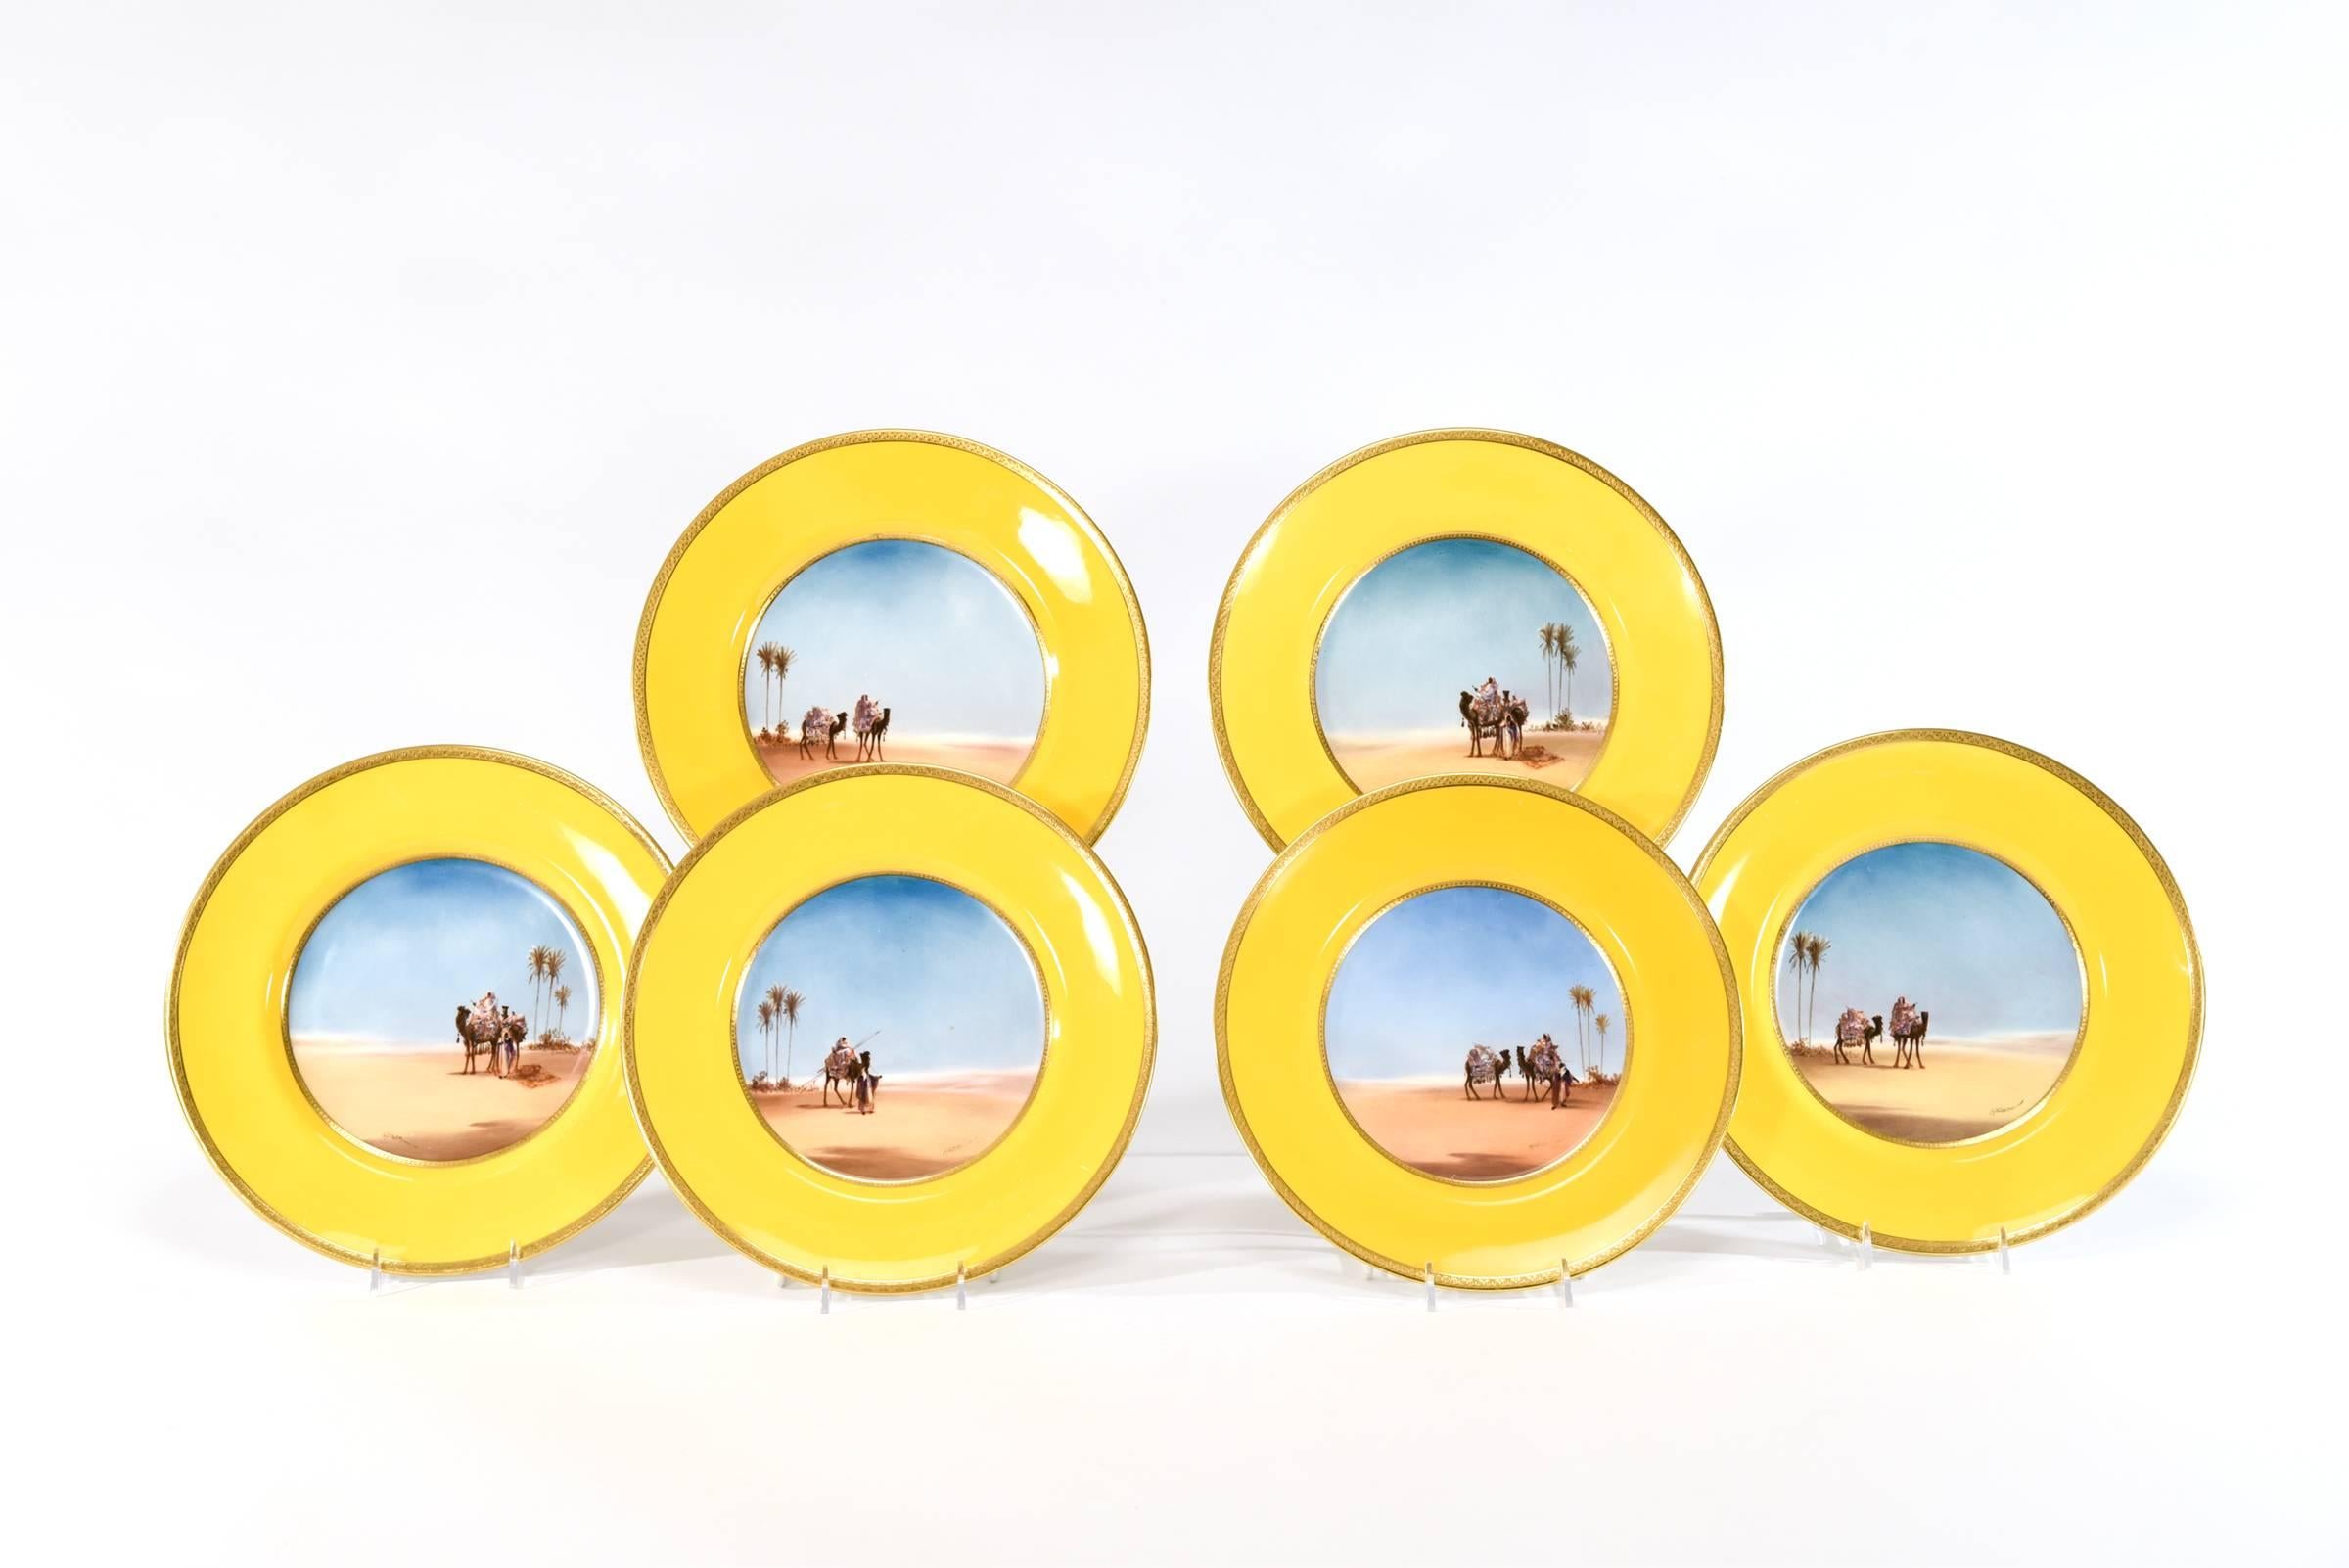 This is one of the rarer subjects painted on any plates and this set of 12 Royal Doulton examples were painted by one of the masters, Harry Allen. Each plate is signed by the artist and is a variation on iconic desert scenes with palm trees, clear